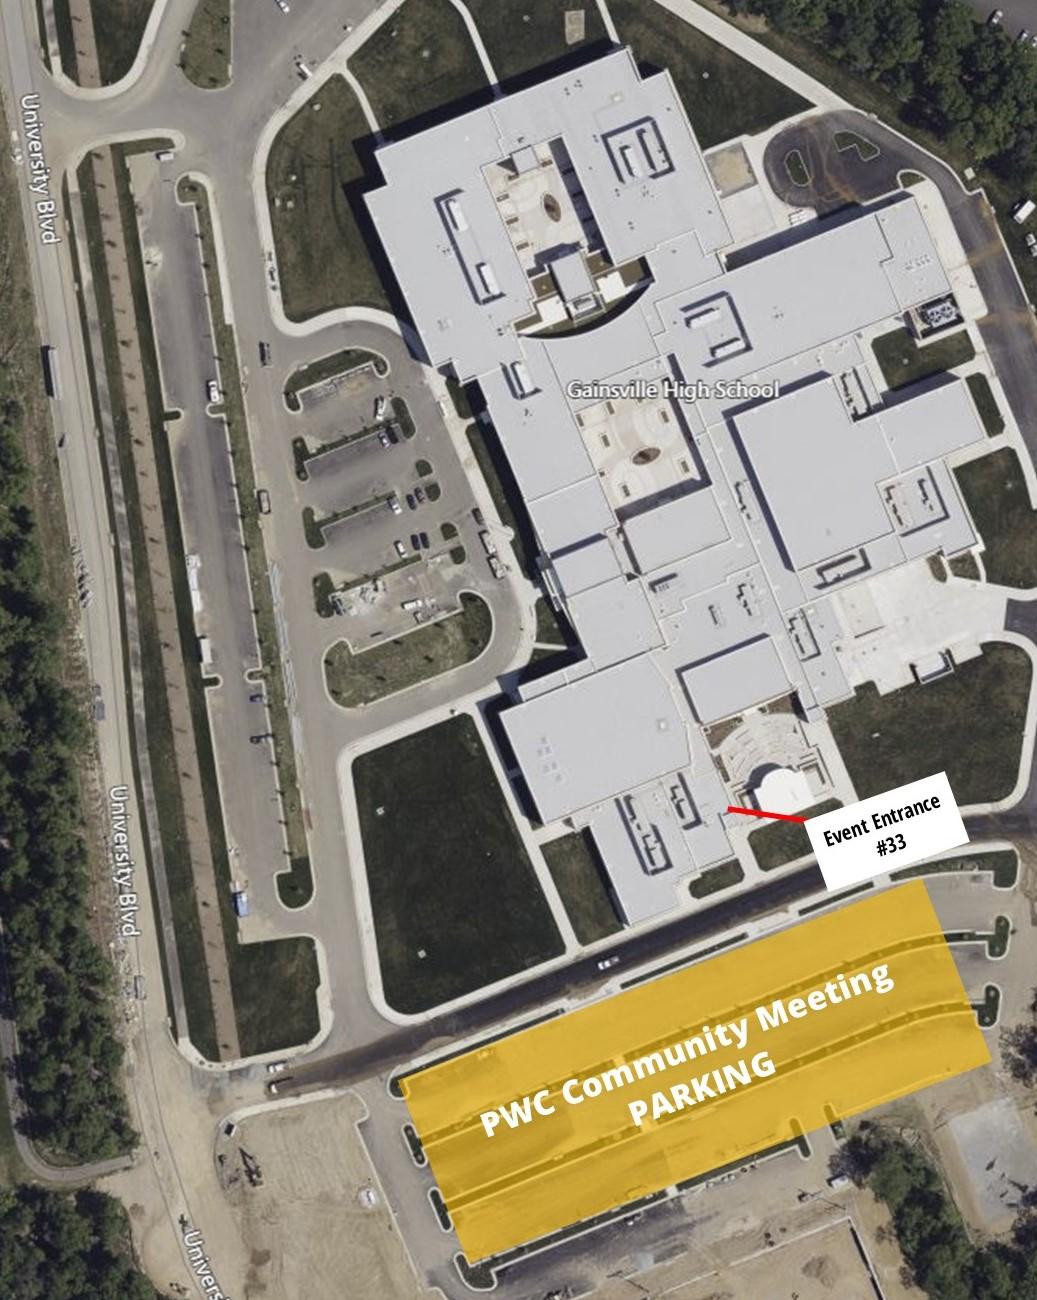 PWC Community Meeting Parking & Entrance Map - Gainesville High School